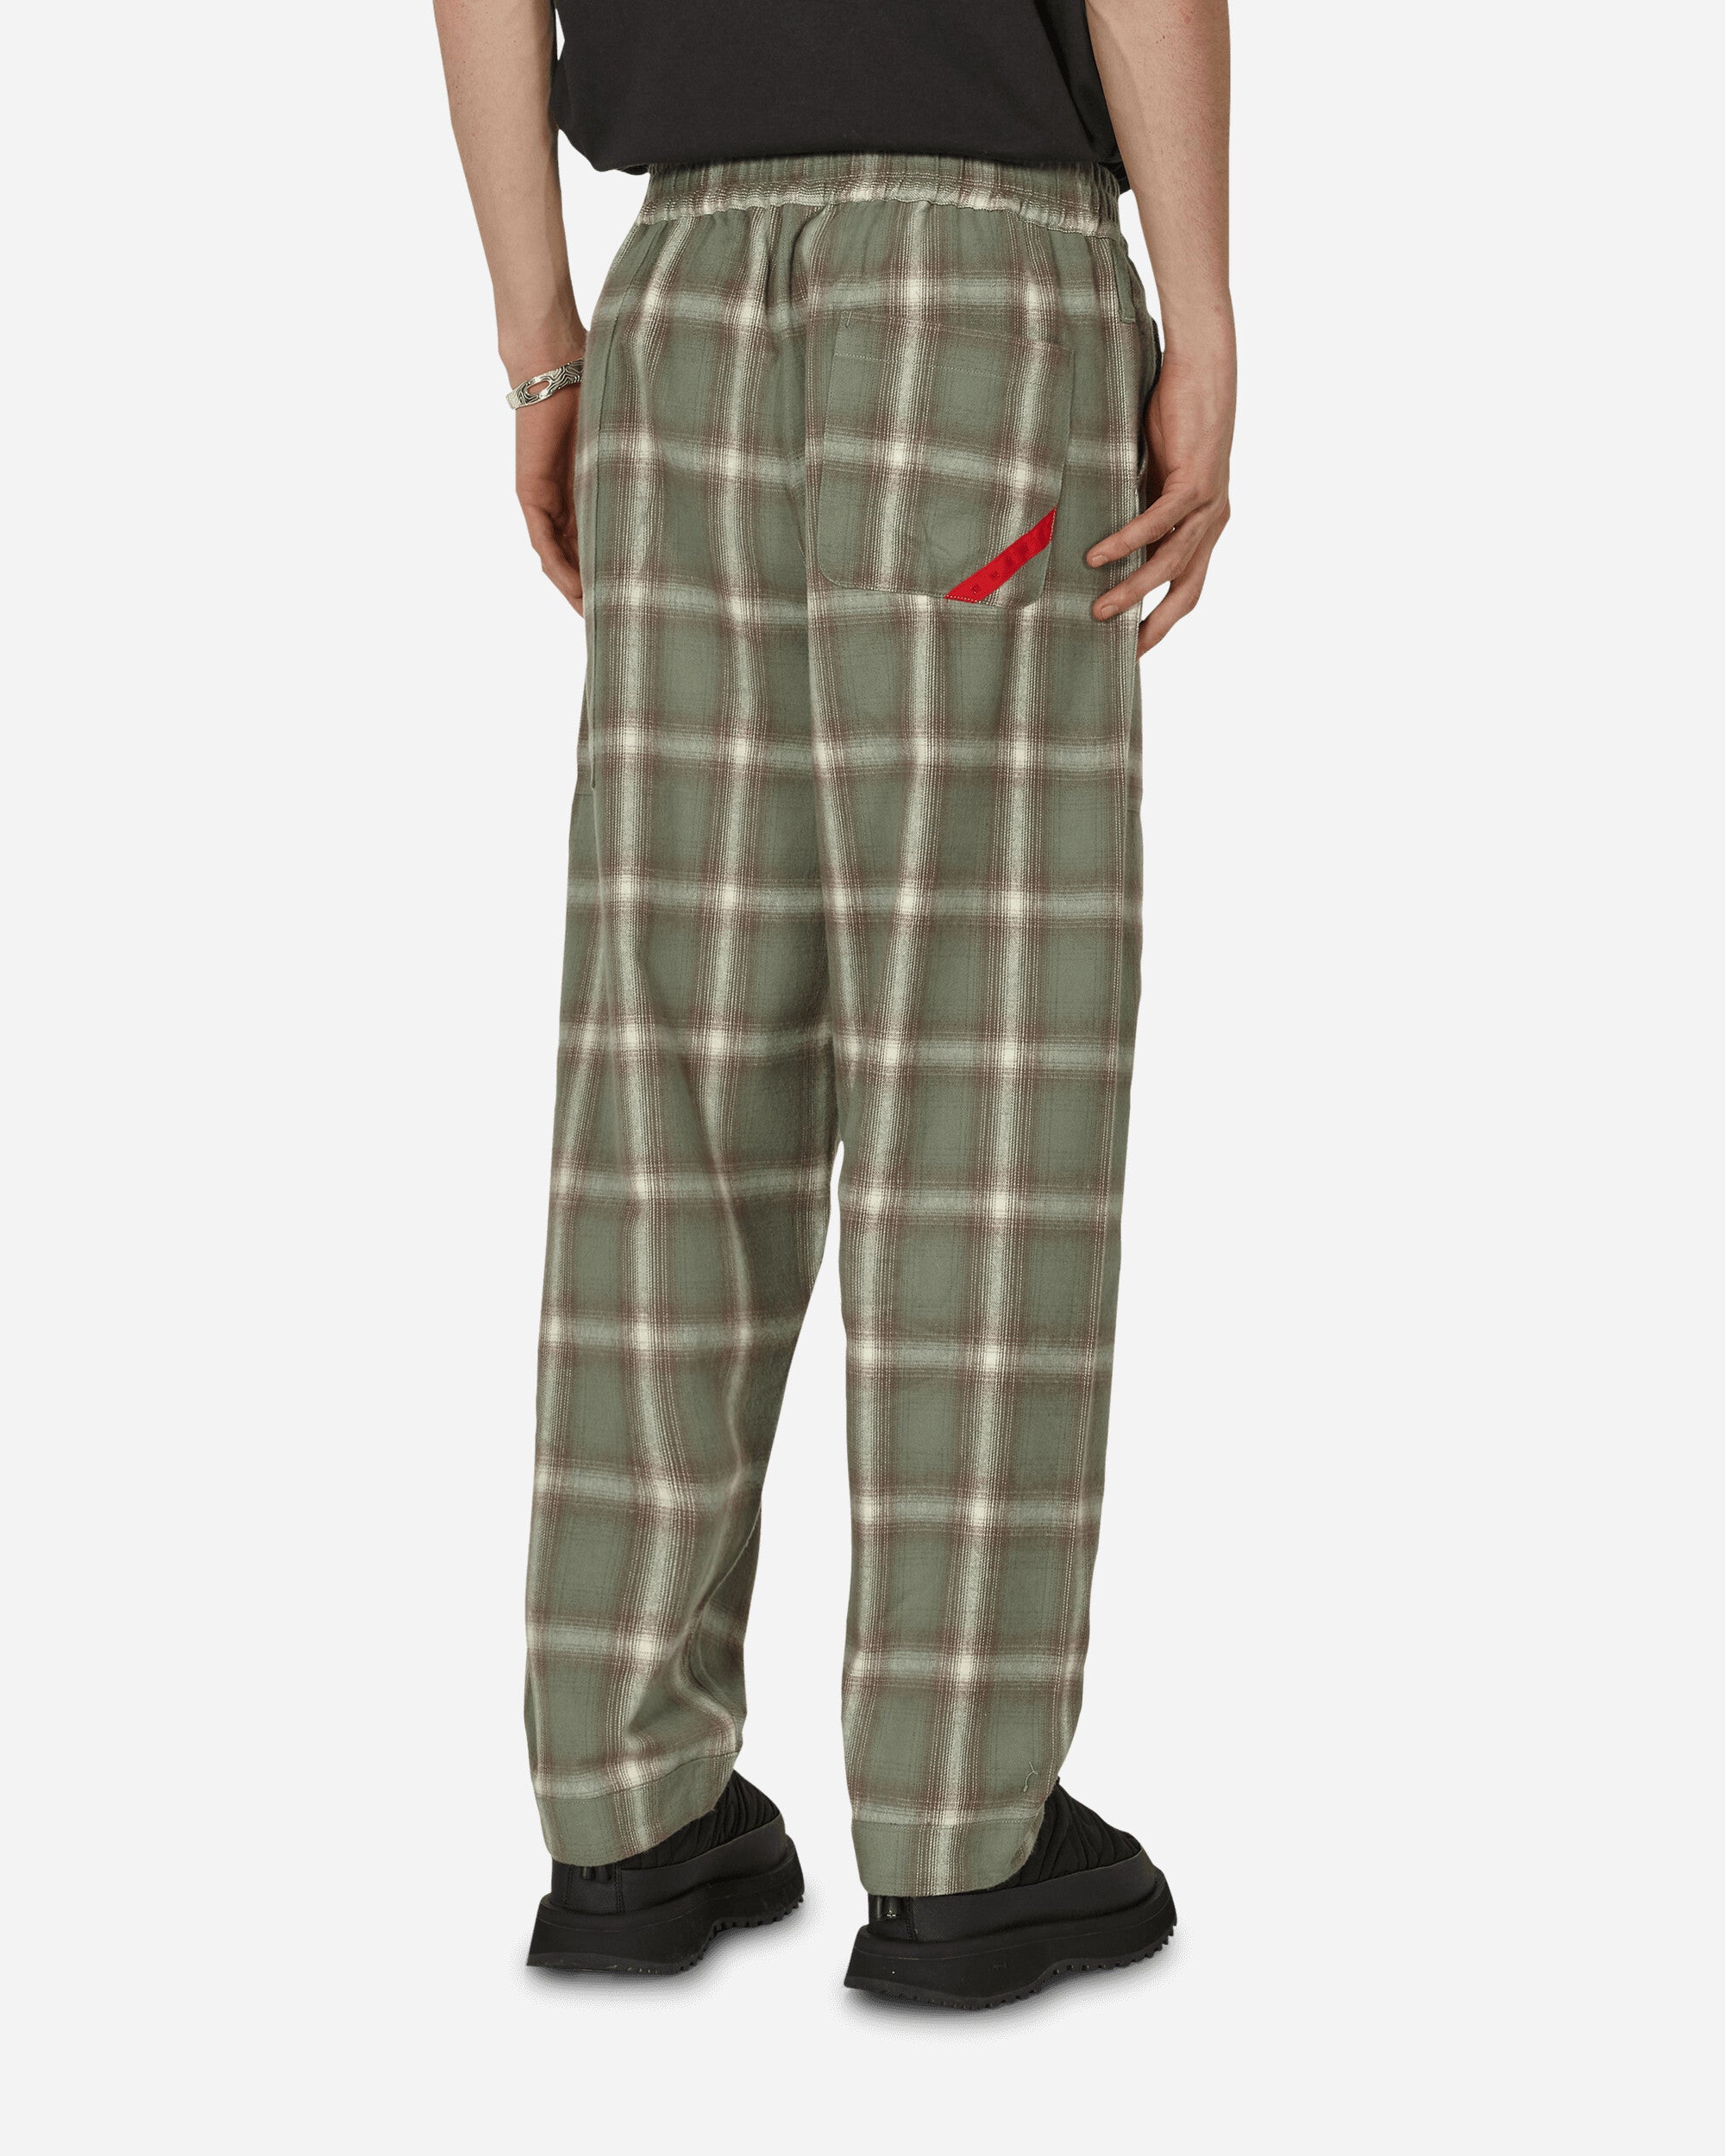 Phingerin Night Pants Nel Ombre Grey Plaid Pants Trousers PD-232-FBT-012 B